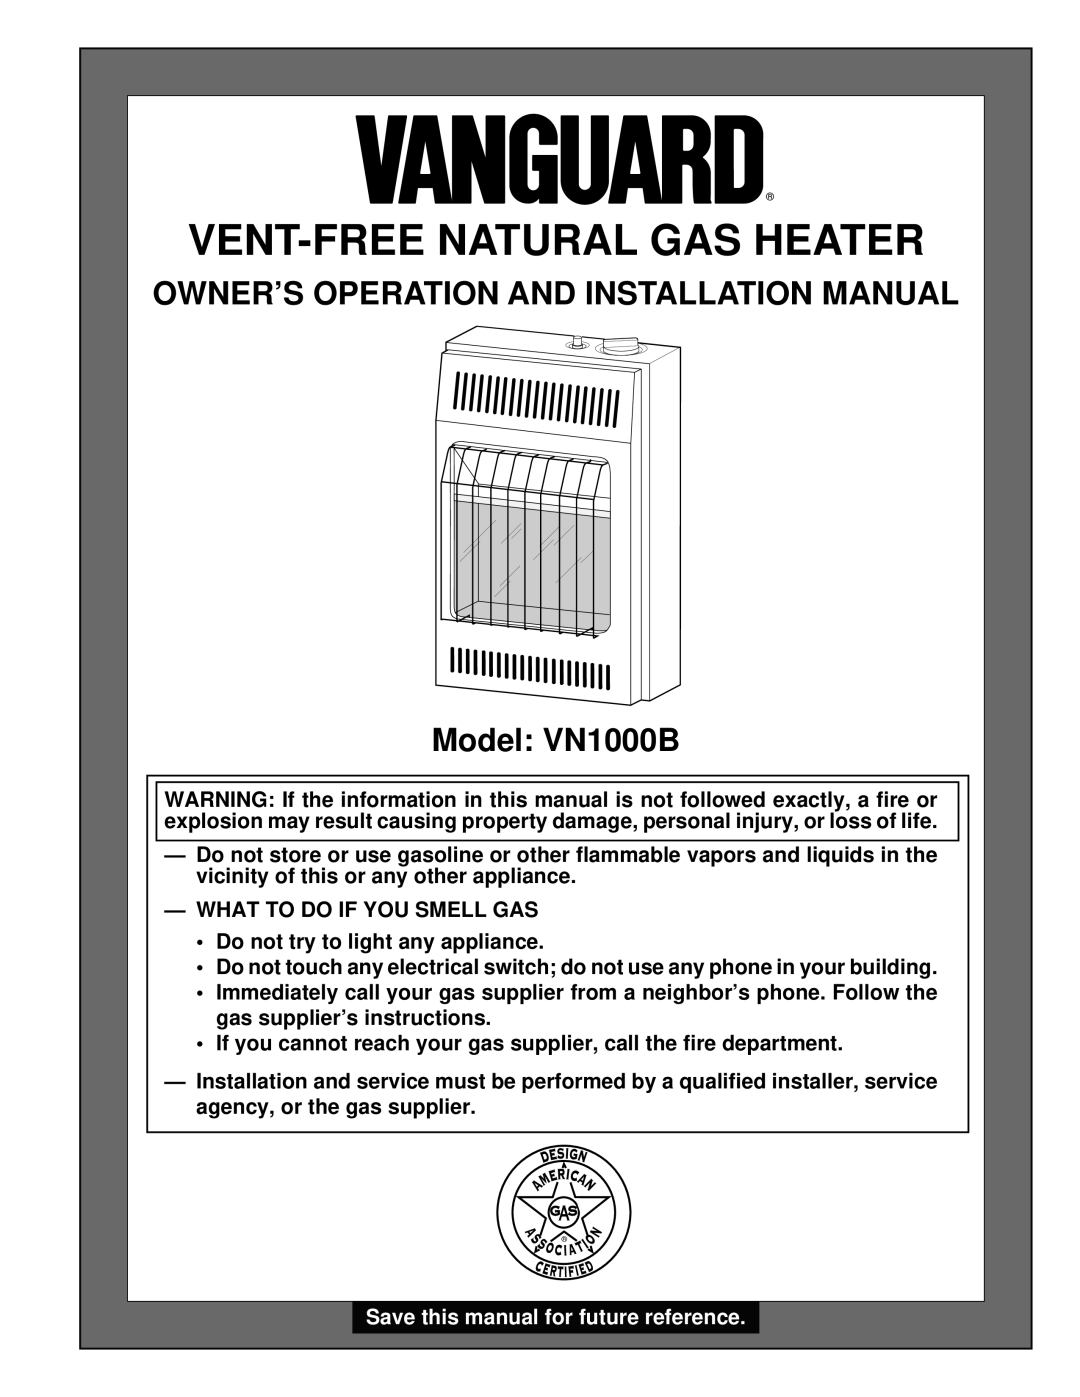 Desa installation manual Owner’S Operation And Installation Manual, Model VN1000B, Vent-Freenatural Gas Heater 